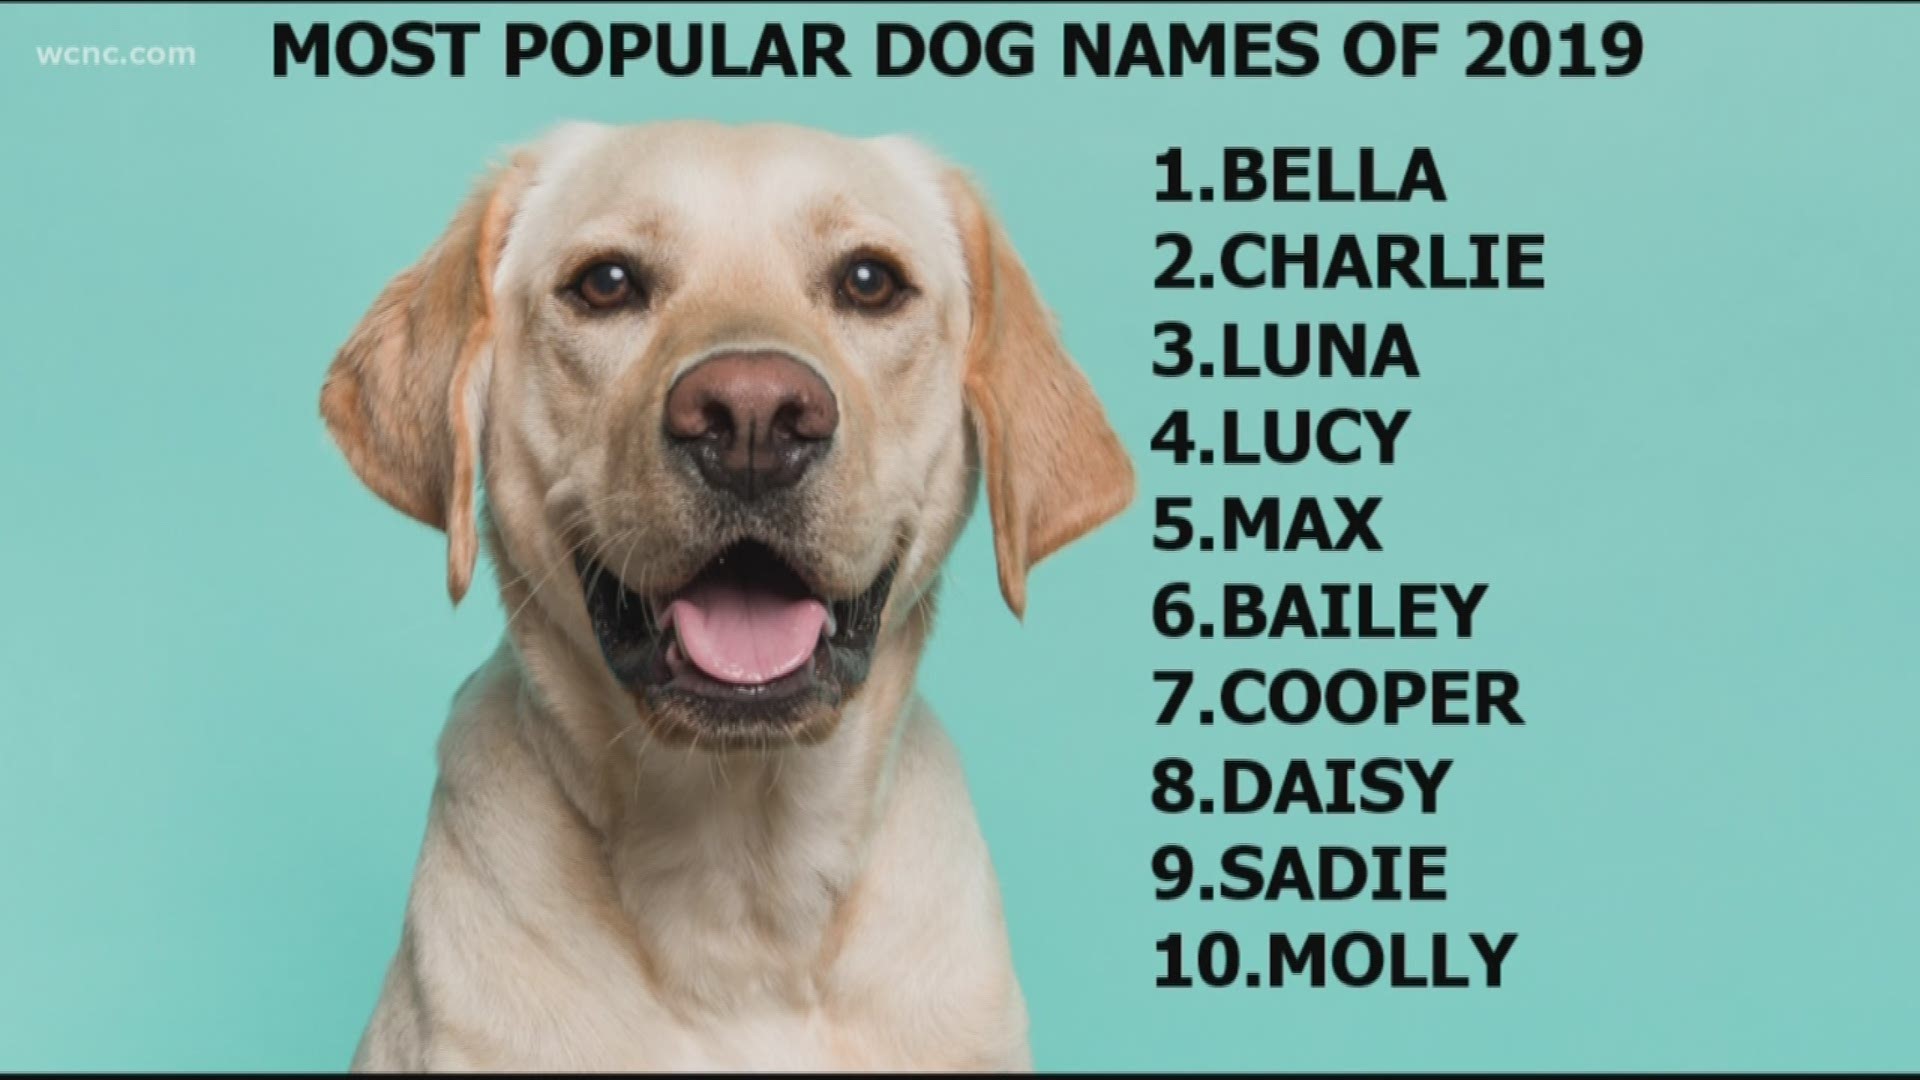 The top 10 most popular dog names of 2019